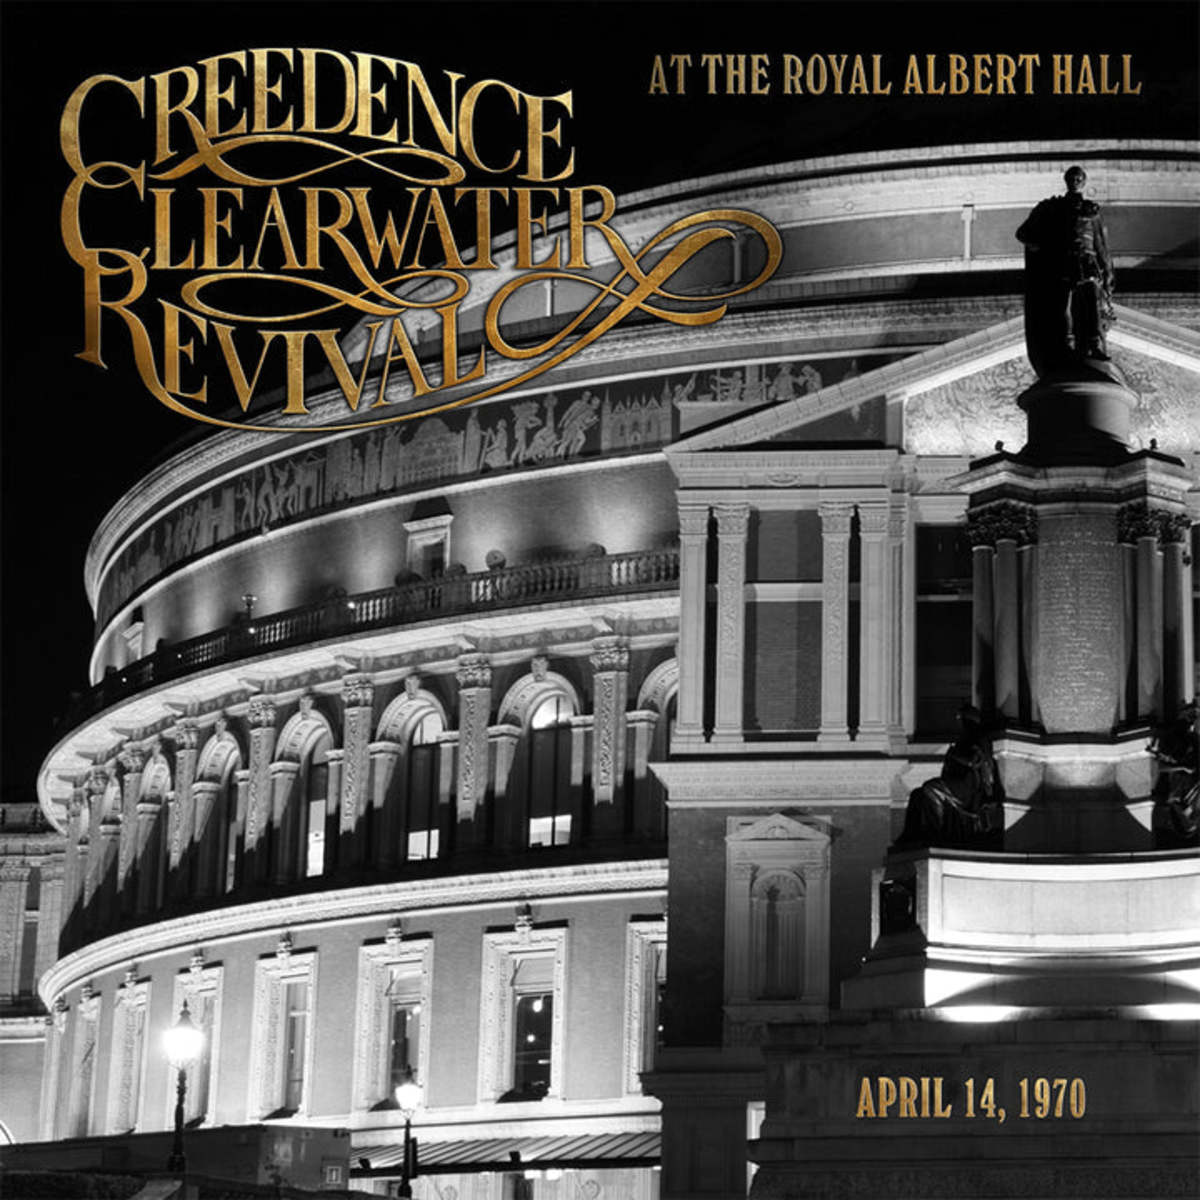 Creedence_Clearwater_Revival_-_Live_At_The_Royal_Albert_Hall_720x_2c6f63fa-eba7-482c-971c-a6f61d49edc4